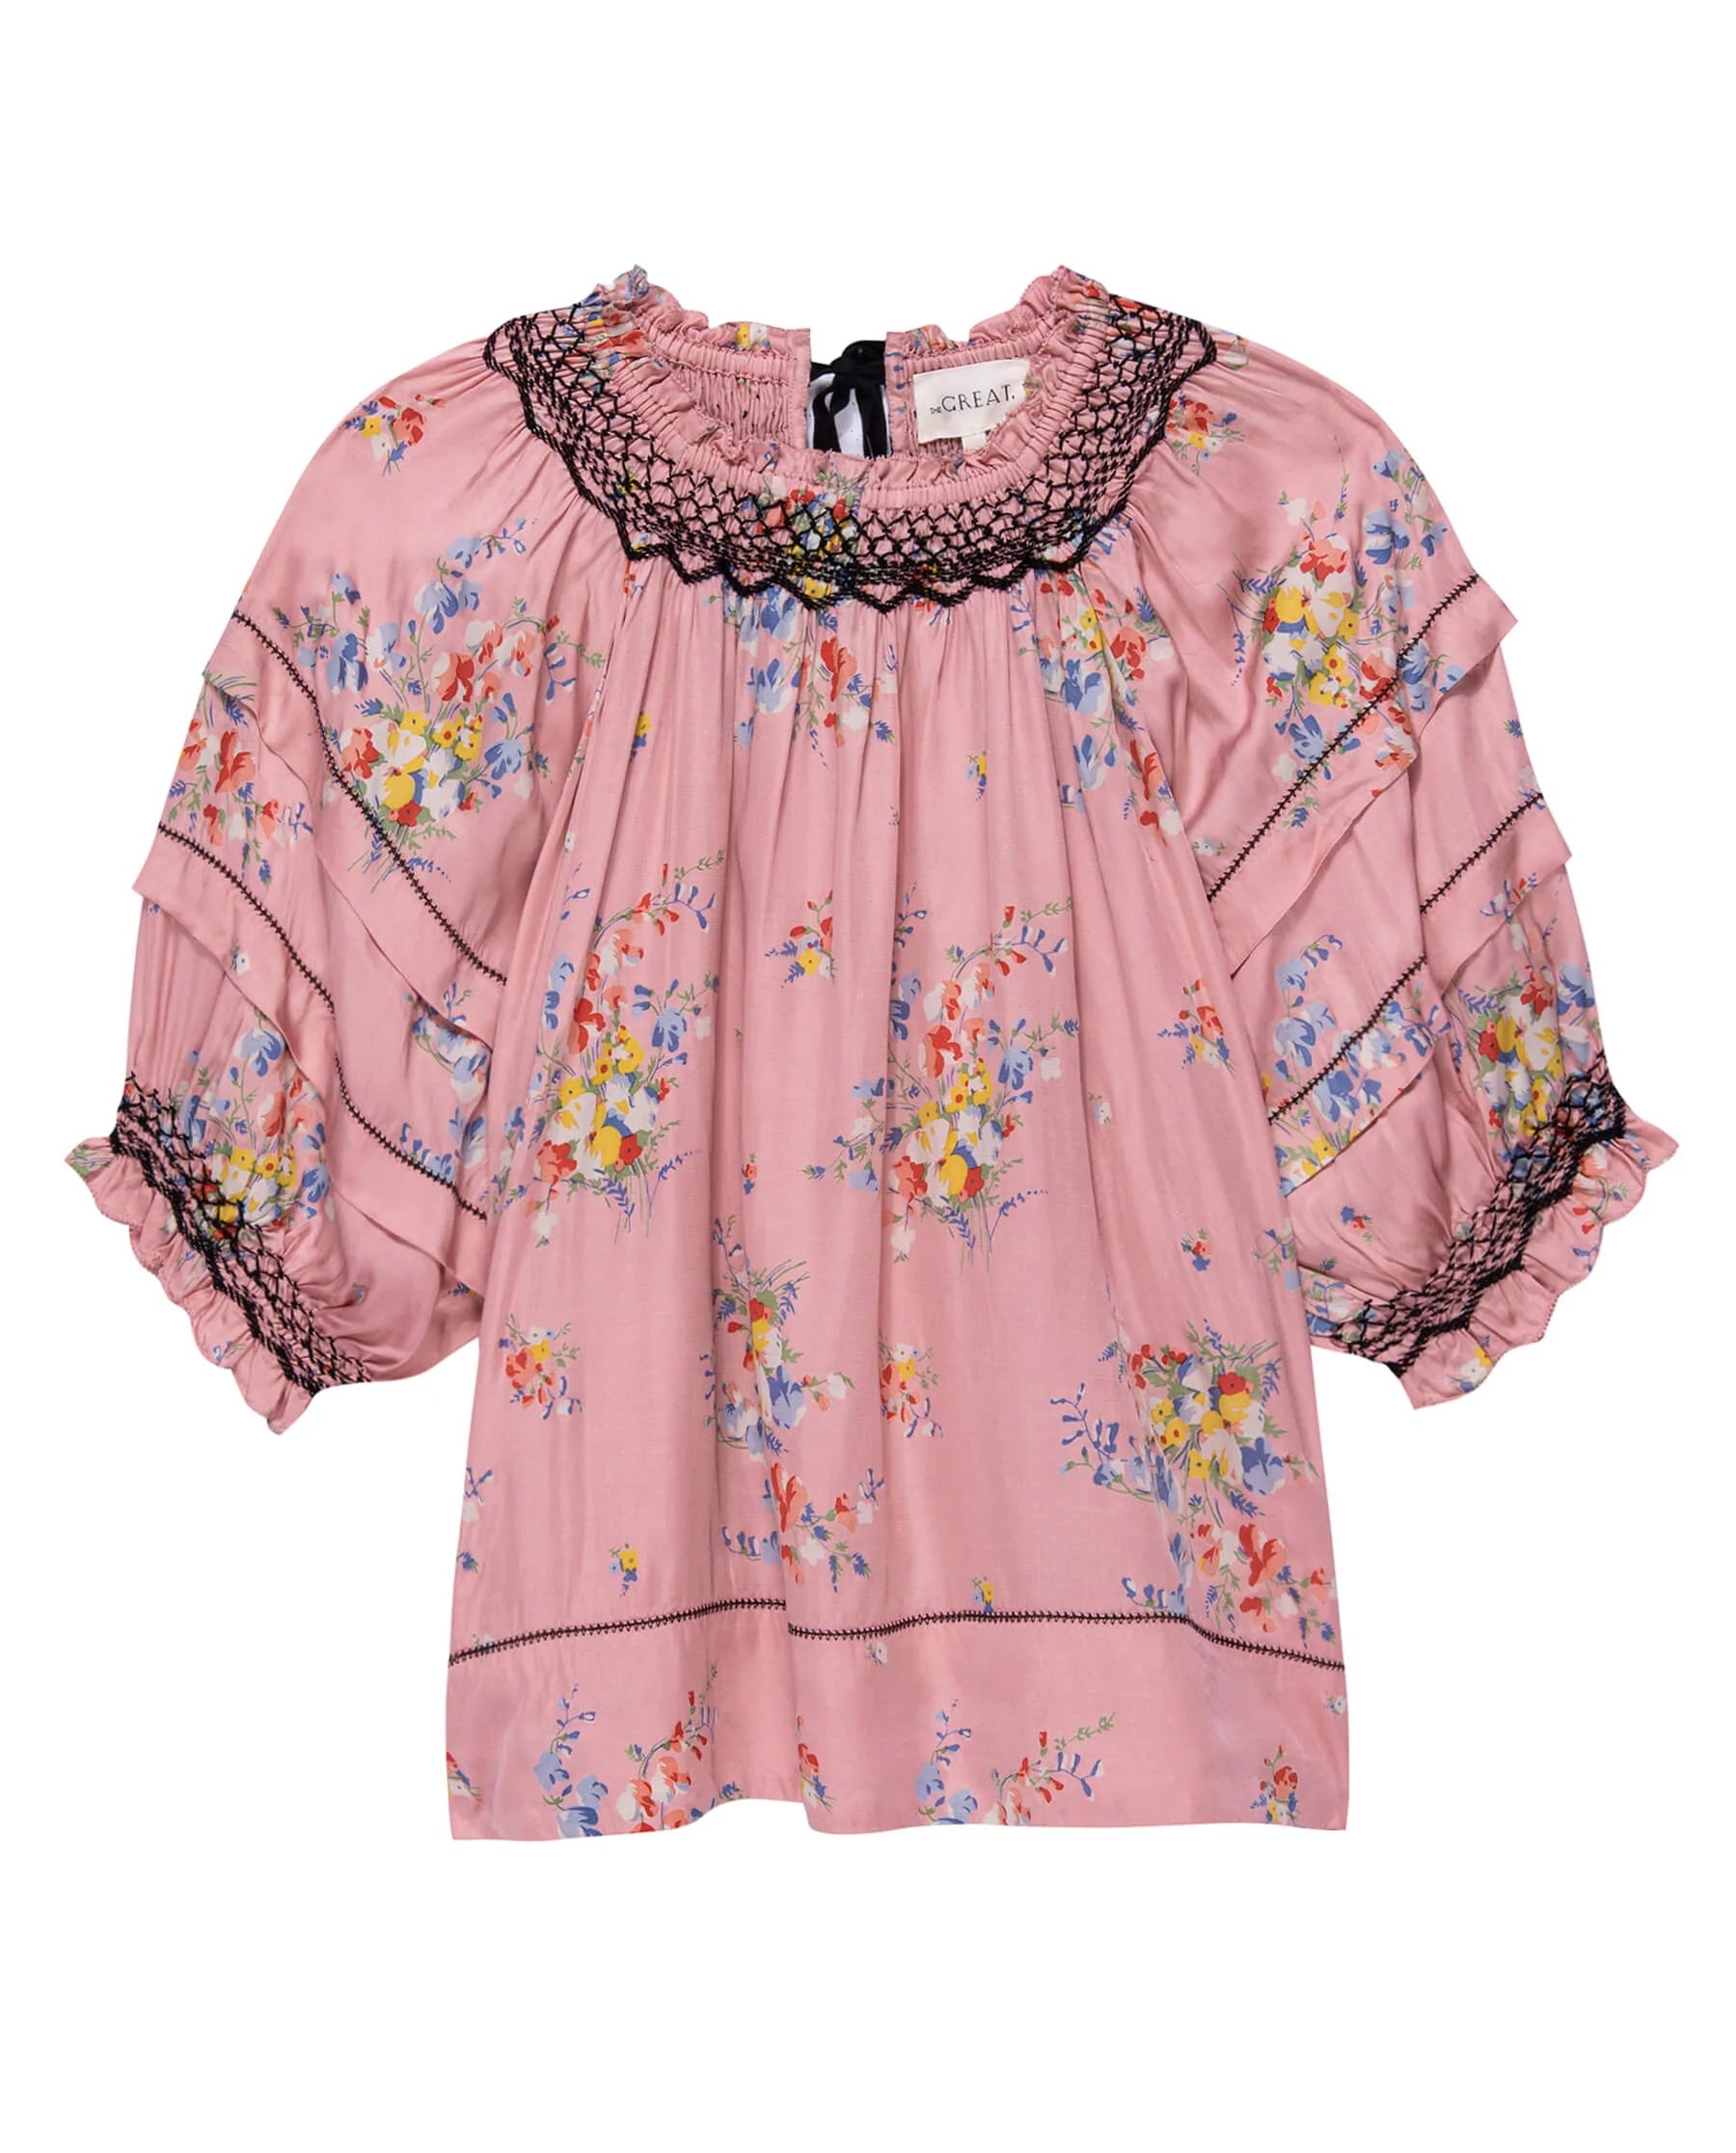 The Folklore Top - Cherry Blossom Floral